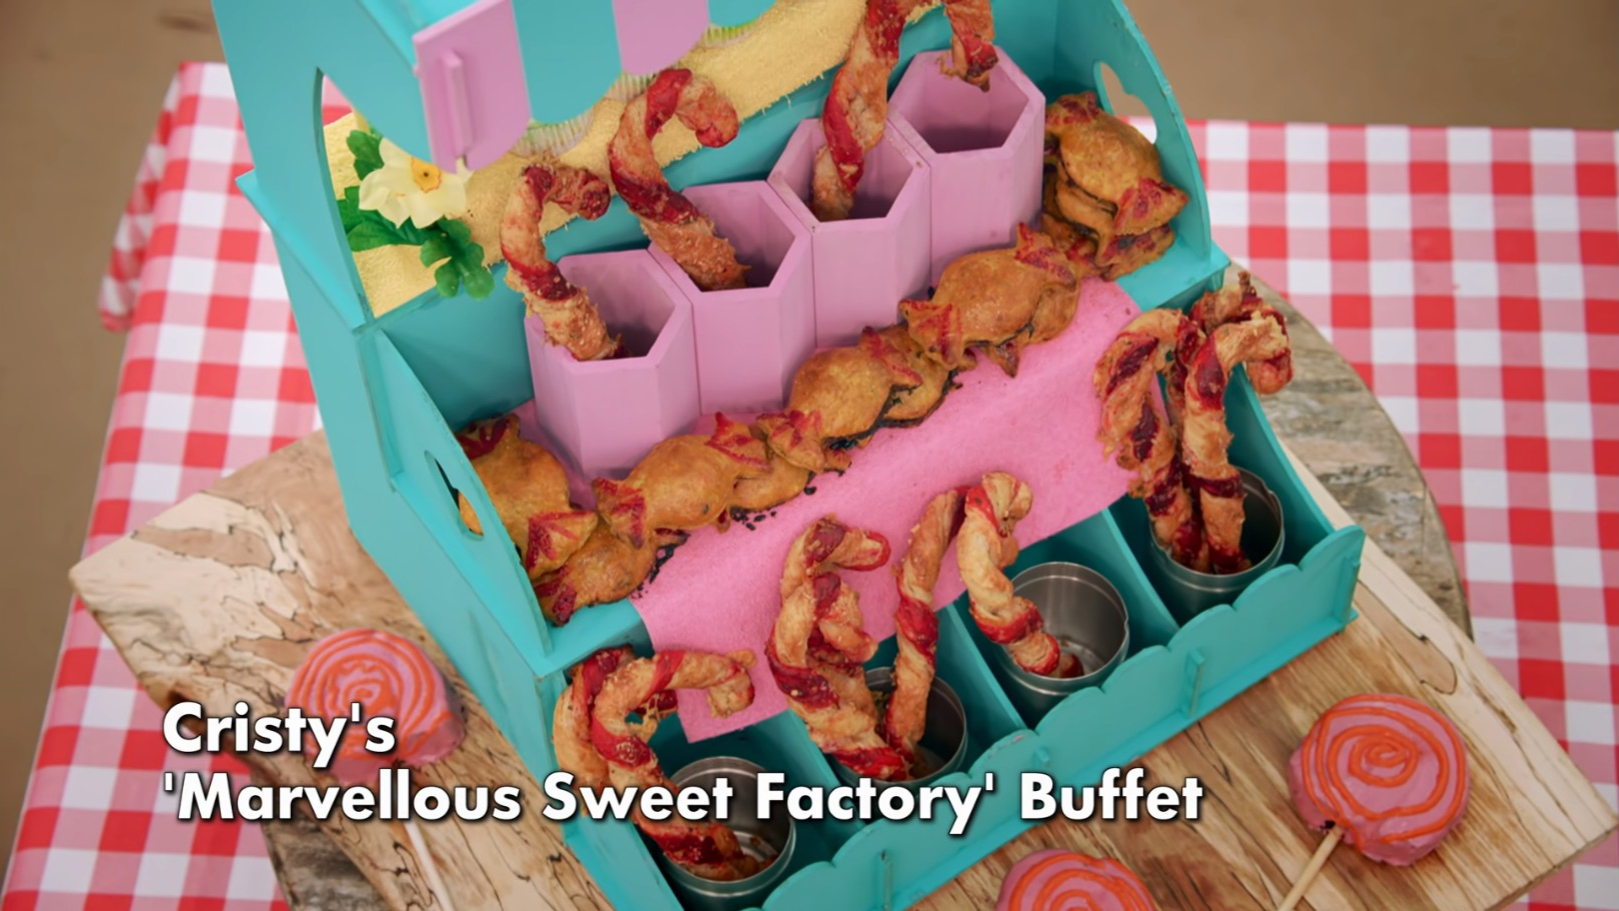 Cristy's Marvellous Sweet Factory Buffet Showstopper from 'The Great British Baking Show' Season 14's "Party Week"